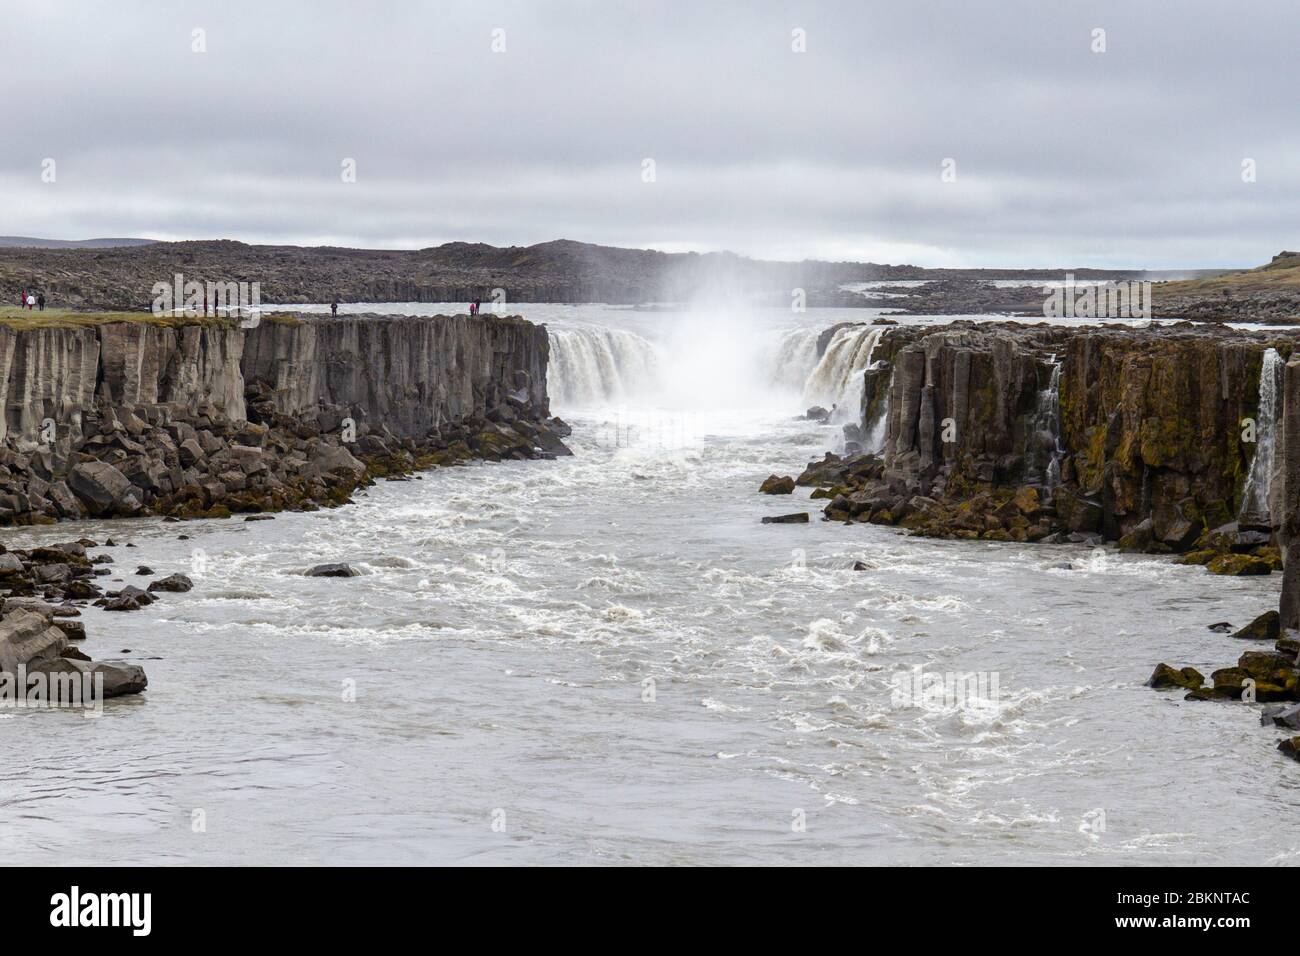 The Selfoss waterfall in the Jökulsárgljúfur canyon upriver from the more famous Dettifoss waterfall, northern Iceland. Stock Photo